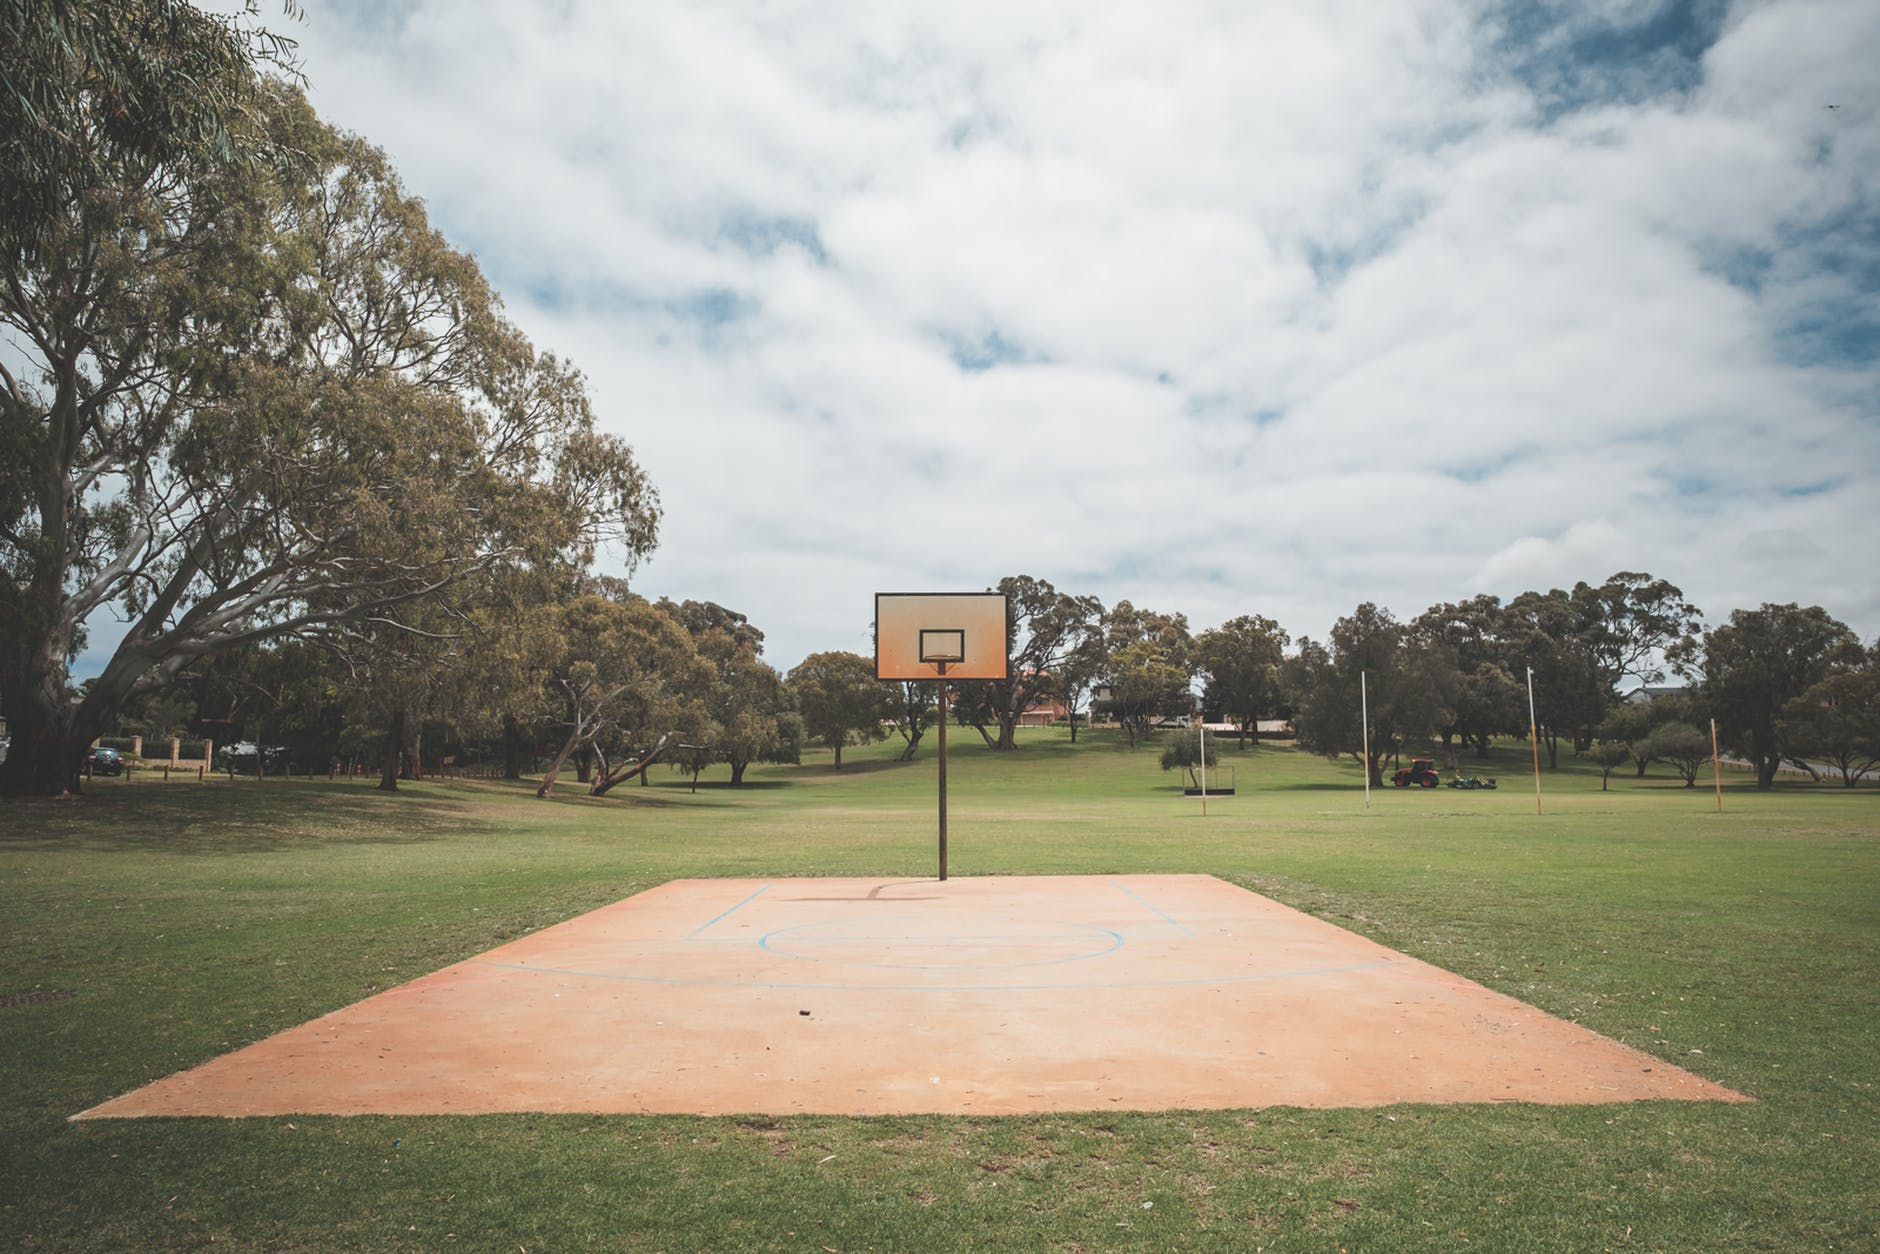 outdoor basketball court on grassy meadow in summer park